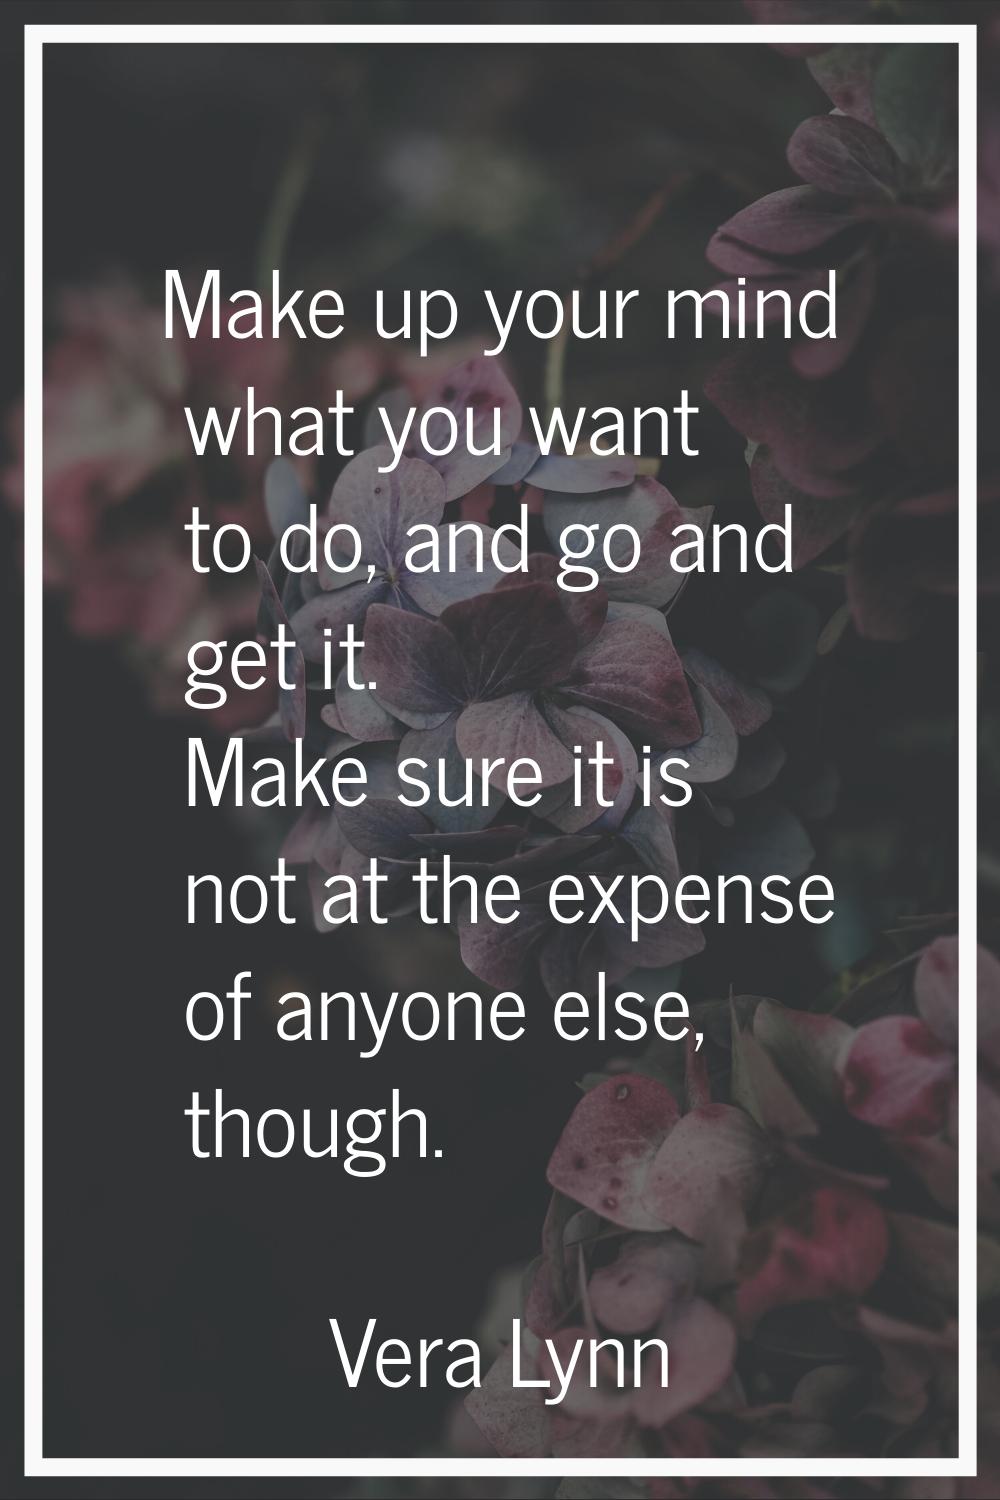 Make up your mind what you want to do, and go and get it. Make sure it is not at the expense of any